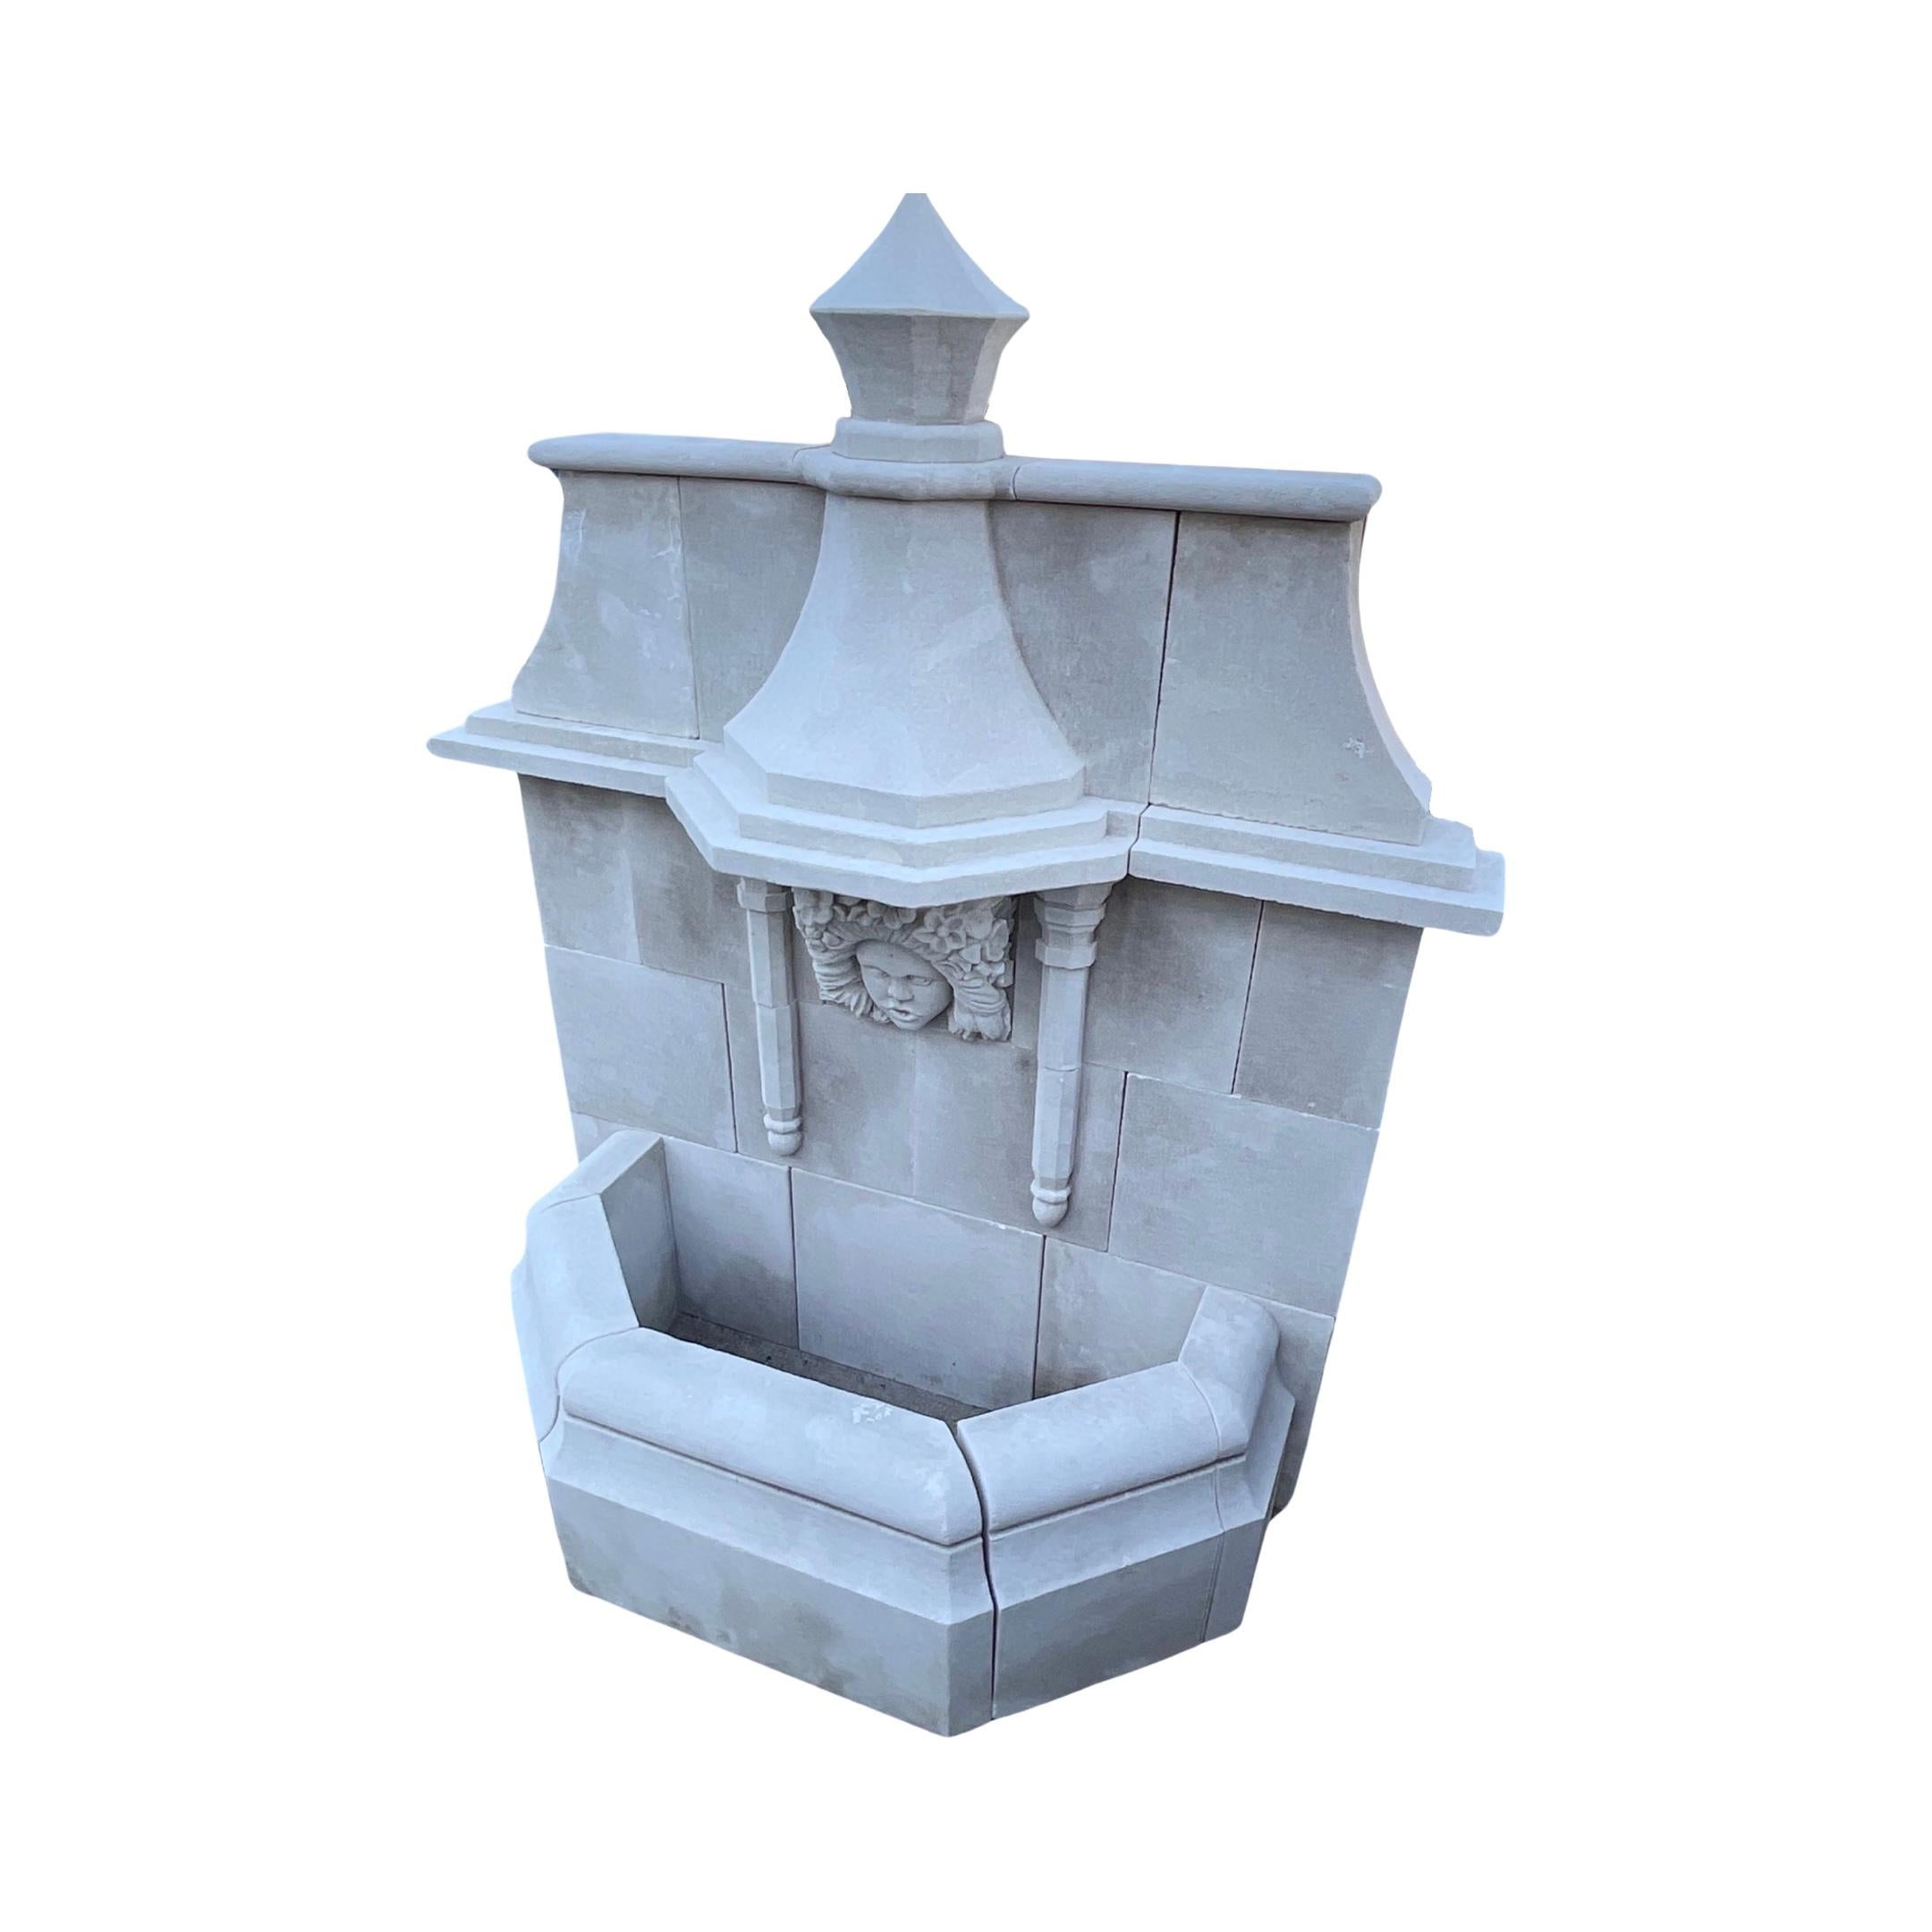 This elegant French Limestone Wall Fountain is the perfect accent to any outdoor or indoor space. Crafted from authentic limestone, this contemporary fountain features a low line basin and a carved figure face with floral motifs, allowing for a